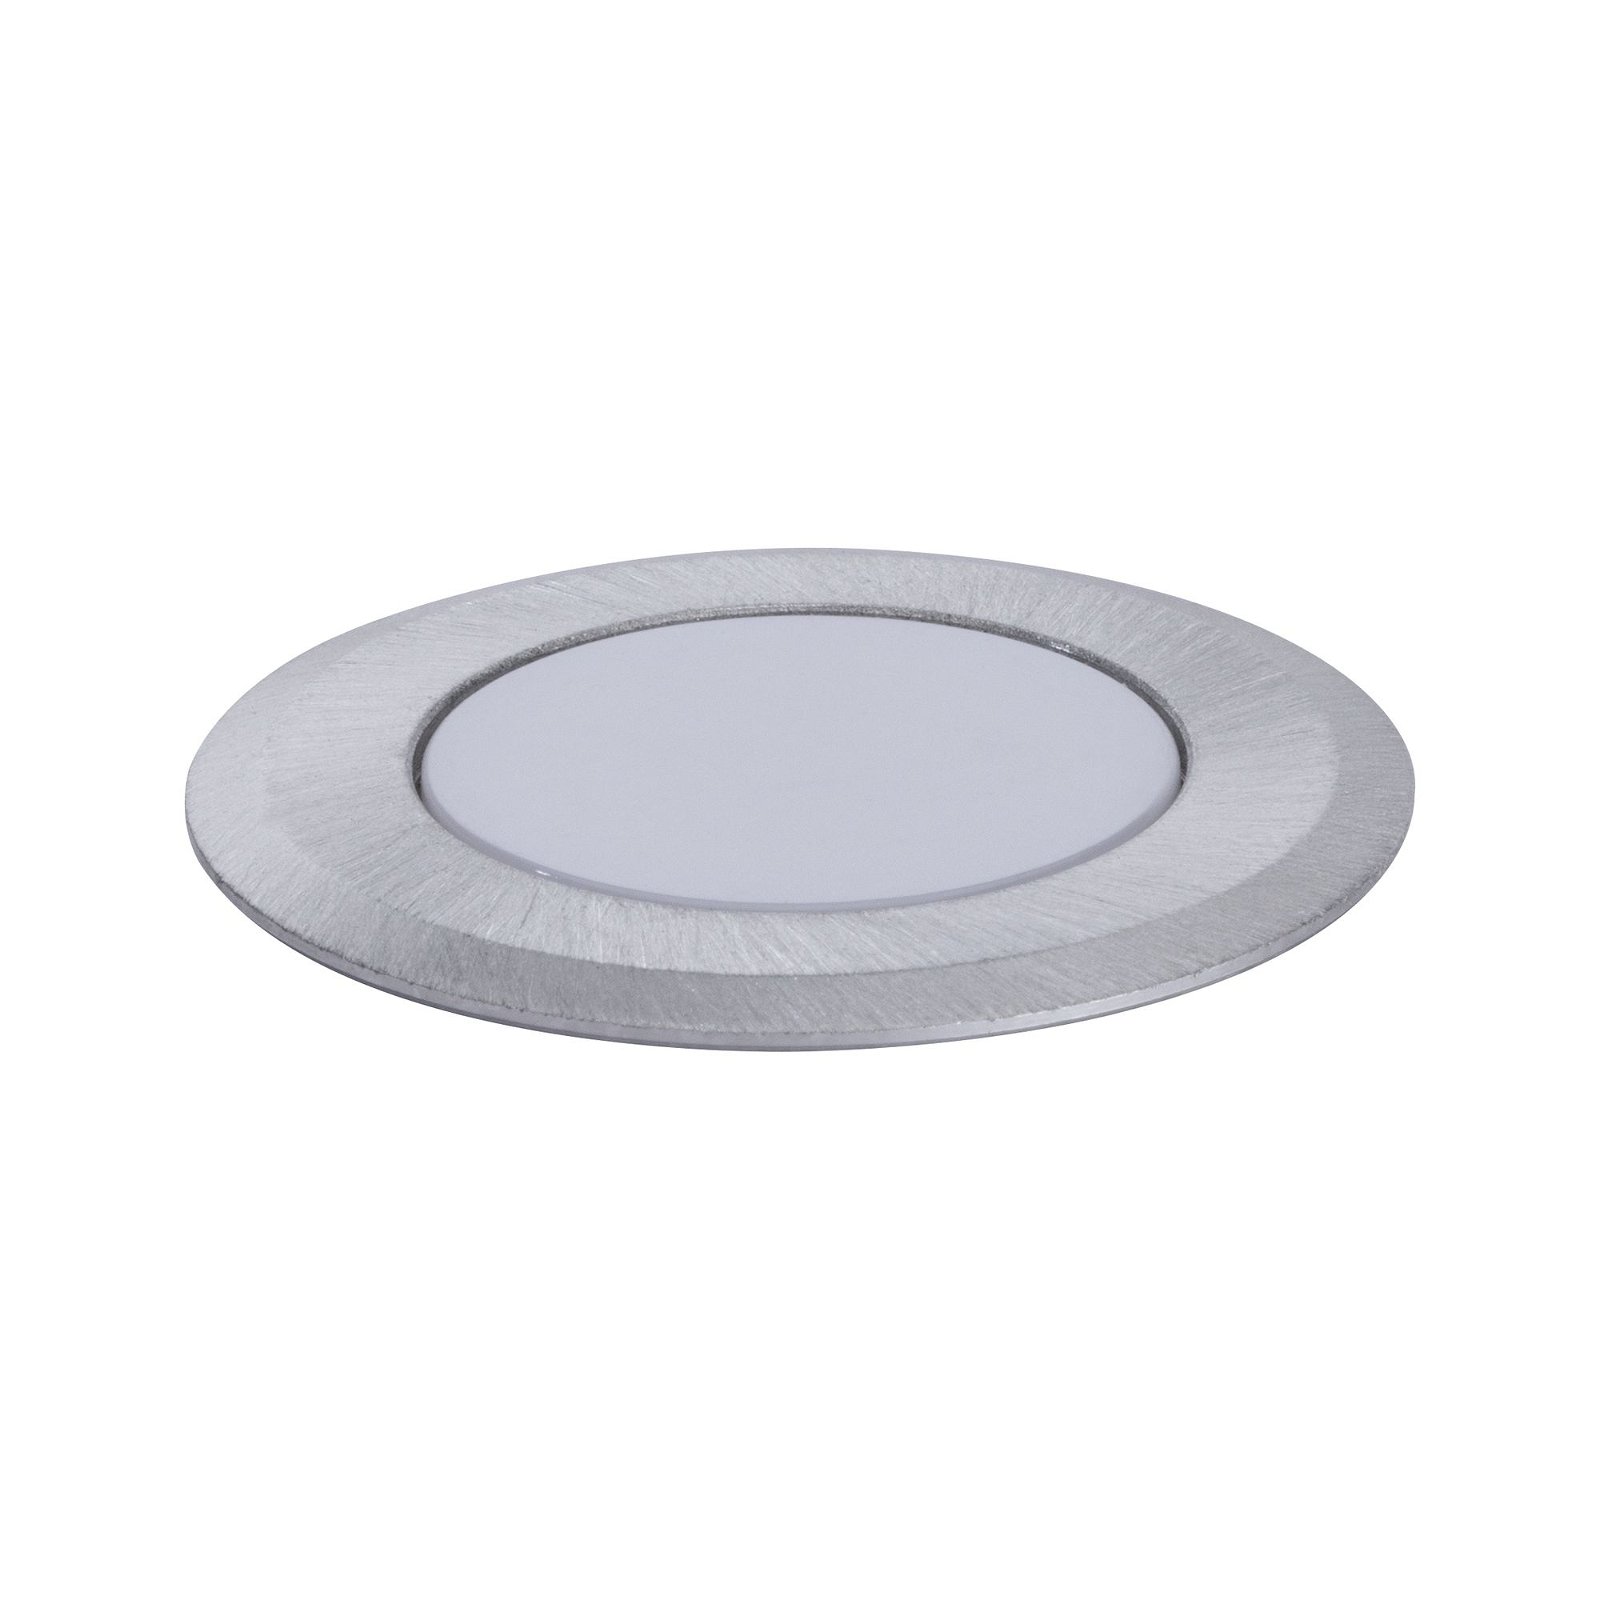 House LED Recessed floor luminaire Warm white IP67 round 50mm 3000K 2W 60lm 230V Semi-crown gold Stainless steel/Plastic